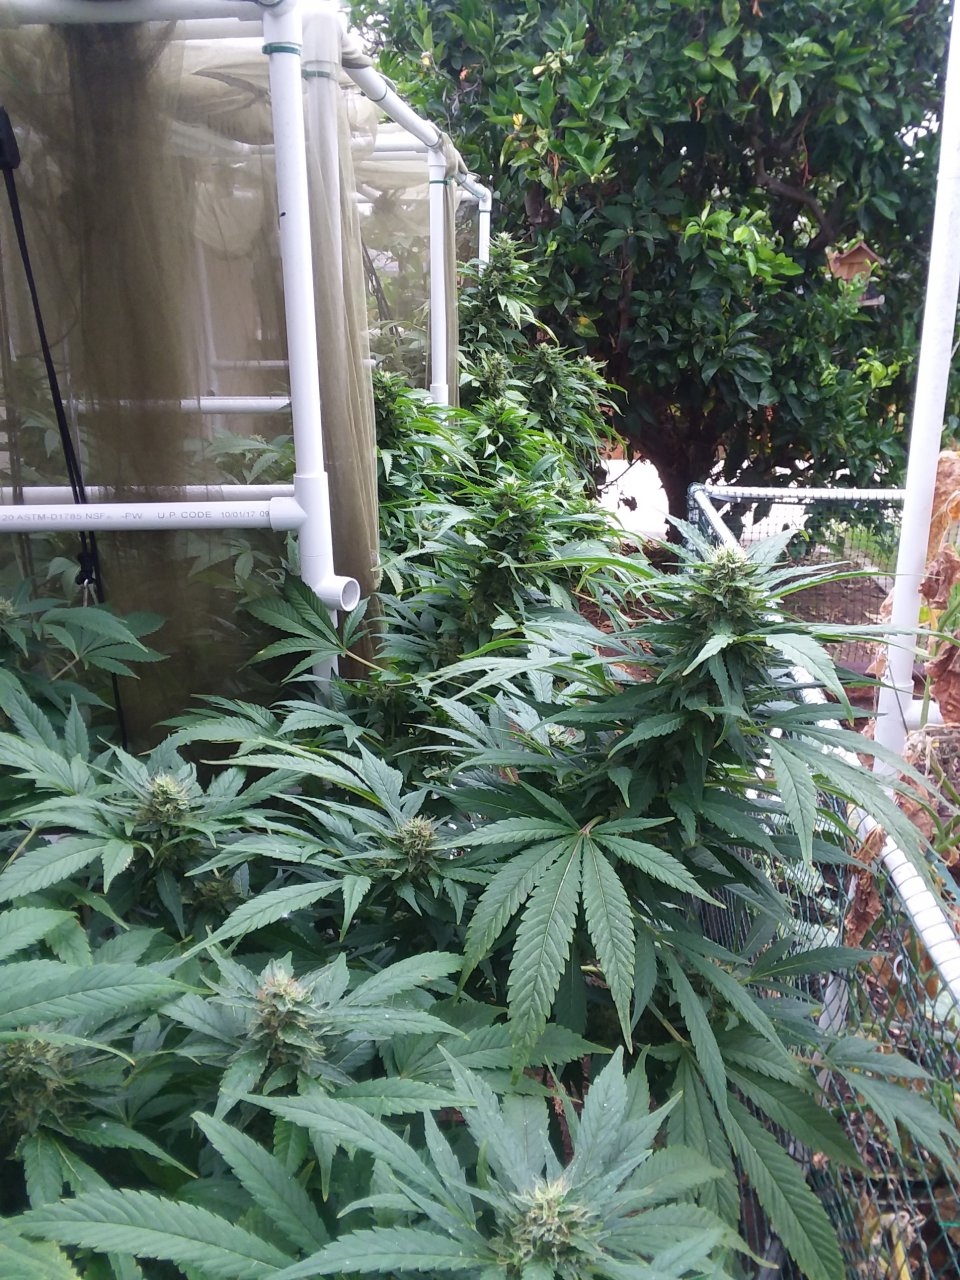 Image of White Widow colas falling out of the grow cages